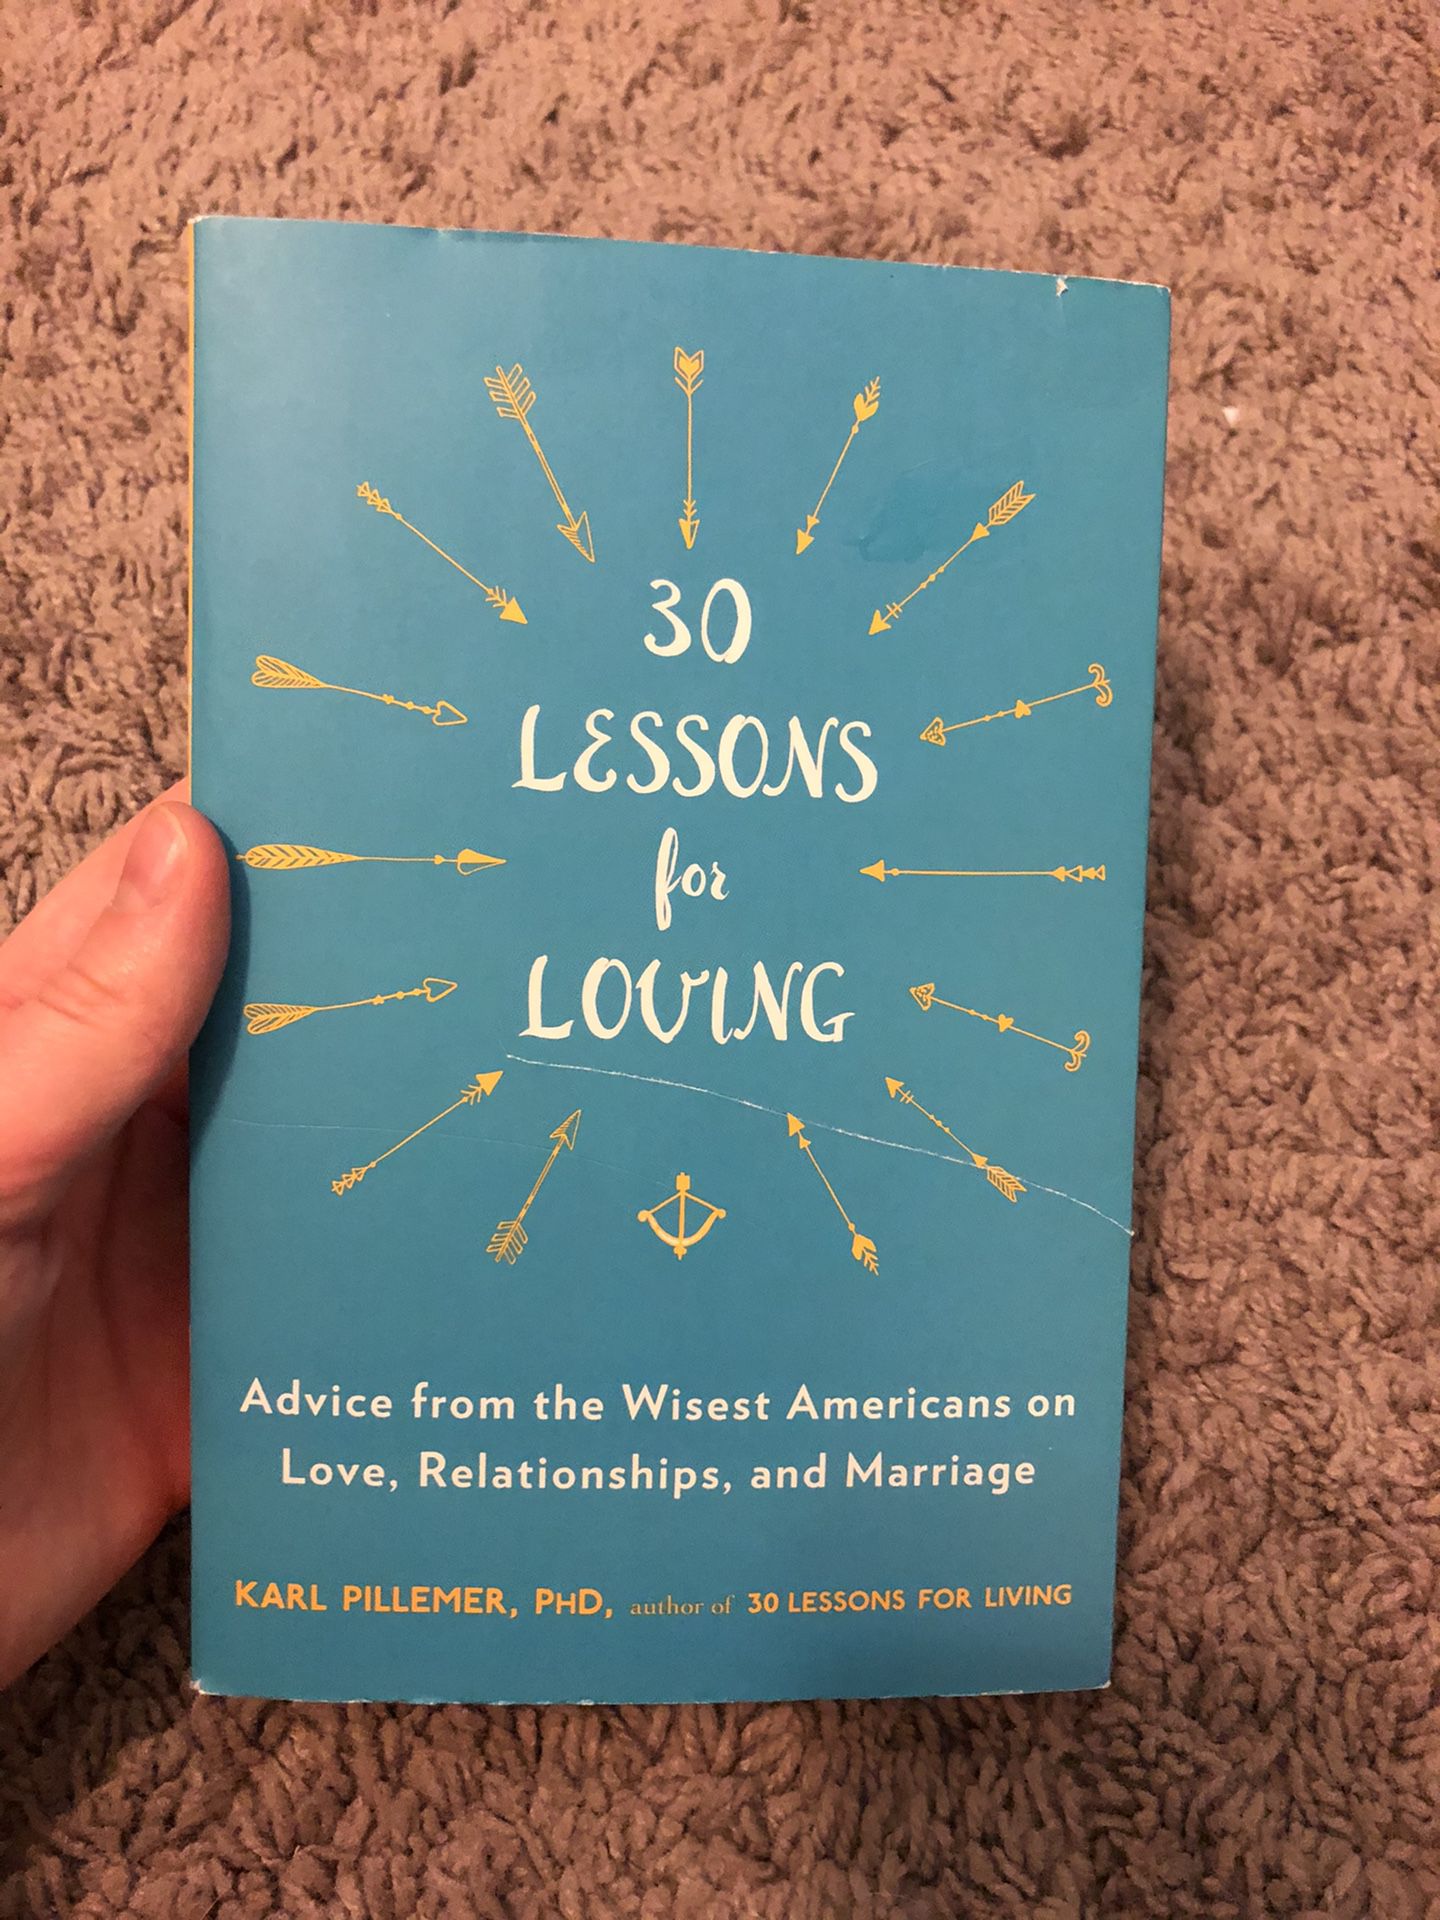 30 Lessons for Loving book by Karl Pillemer